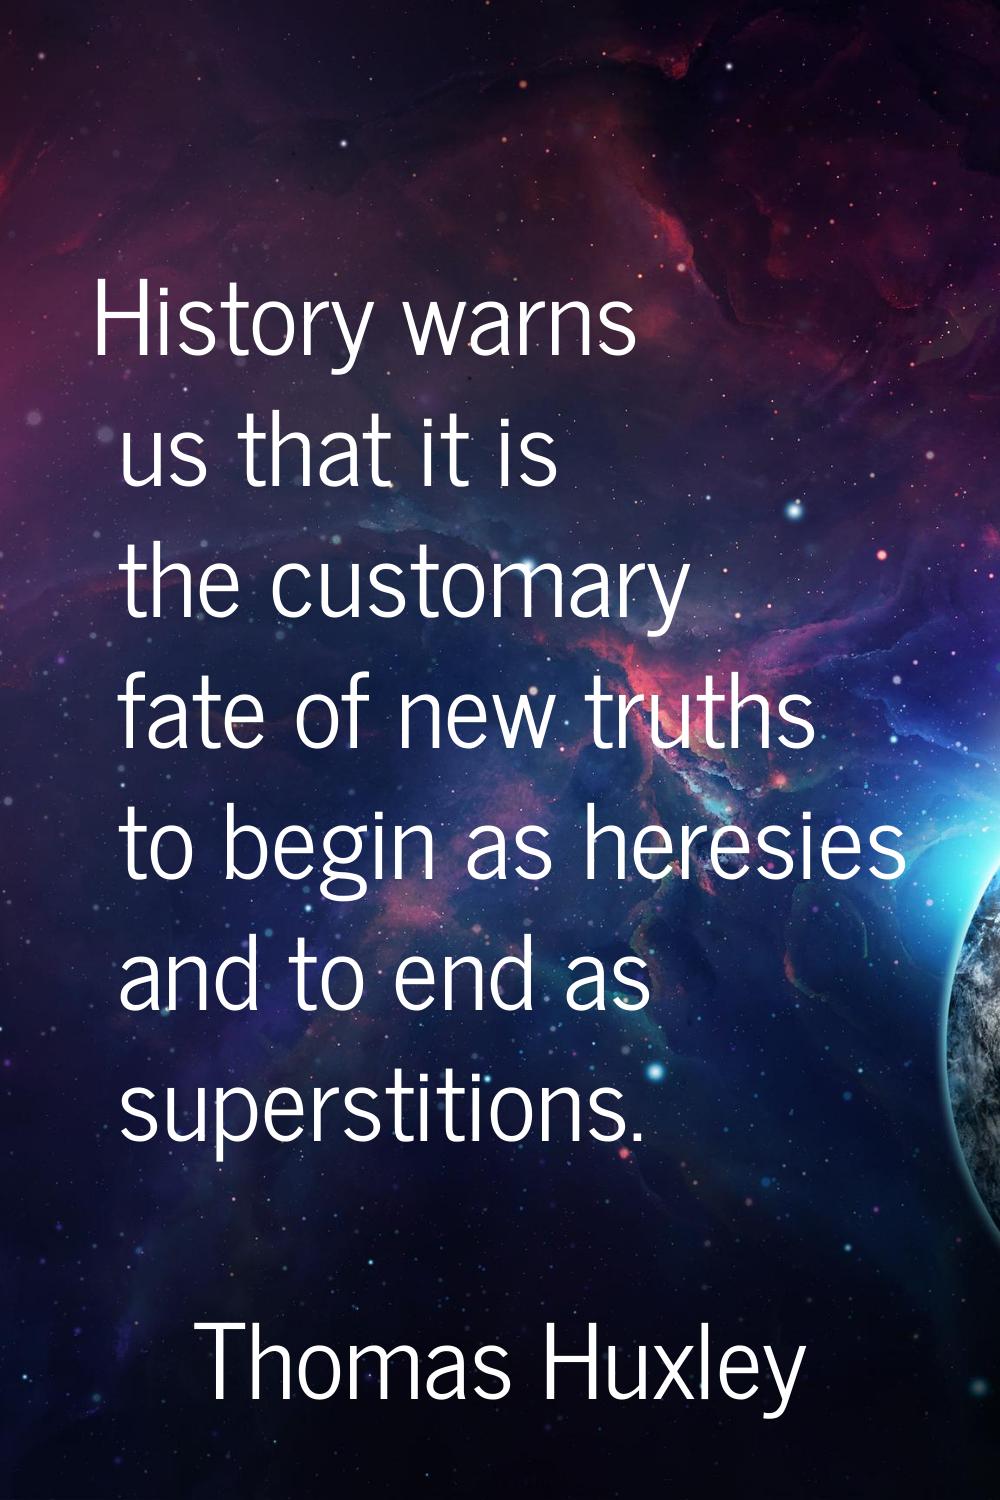 History warns us that it is the customary fate of new truths to begin as heresies and to end as sup